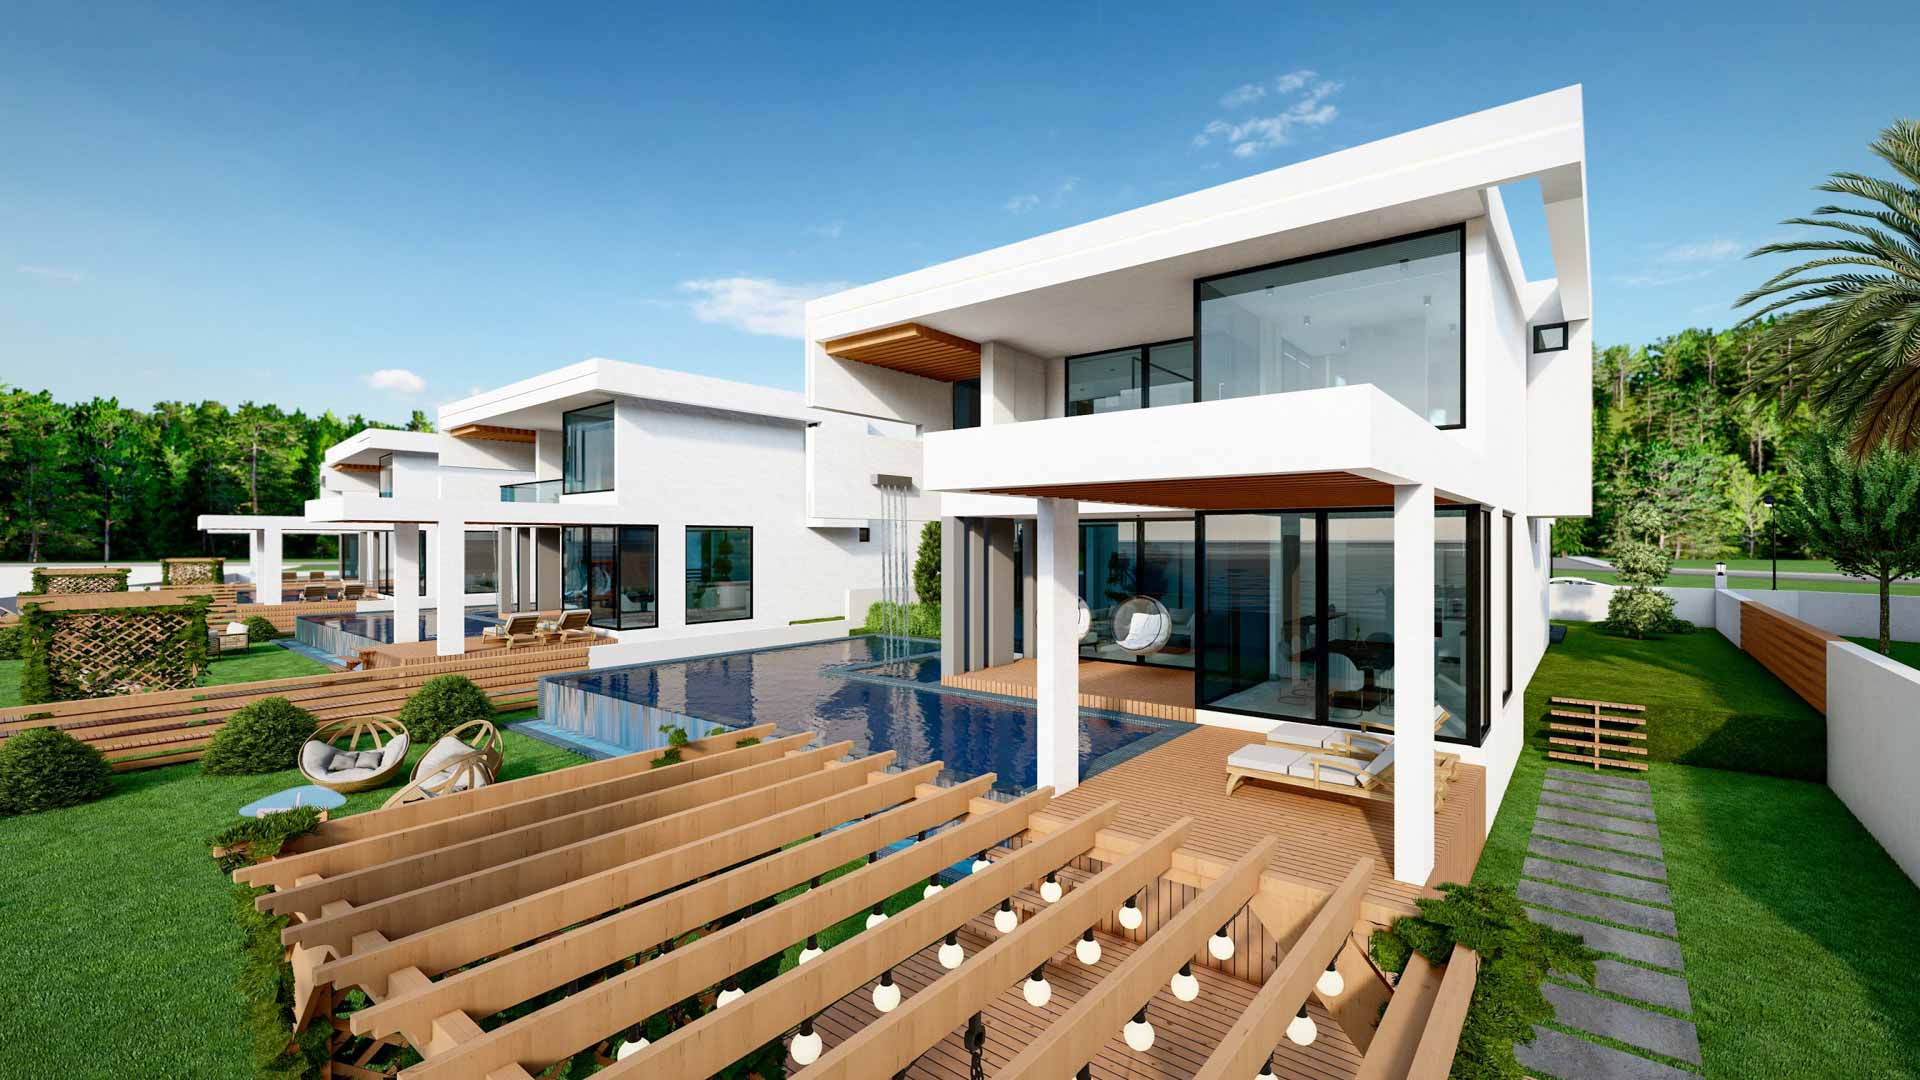 id983-two-storey-41-villas-with-a-garden-and-a-swimming-pool-in-demirtas-area (9)